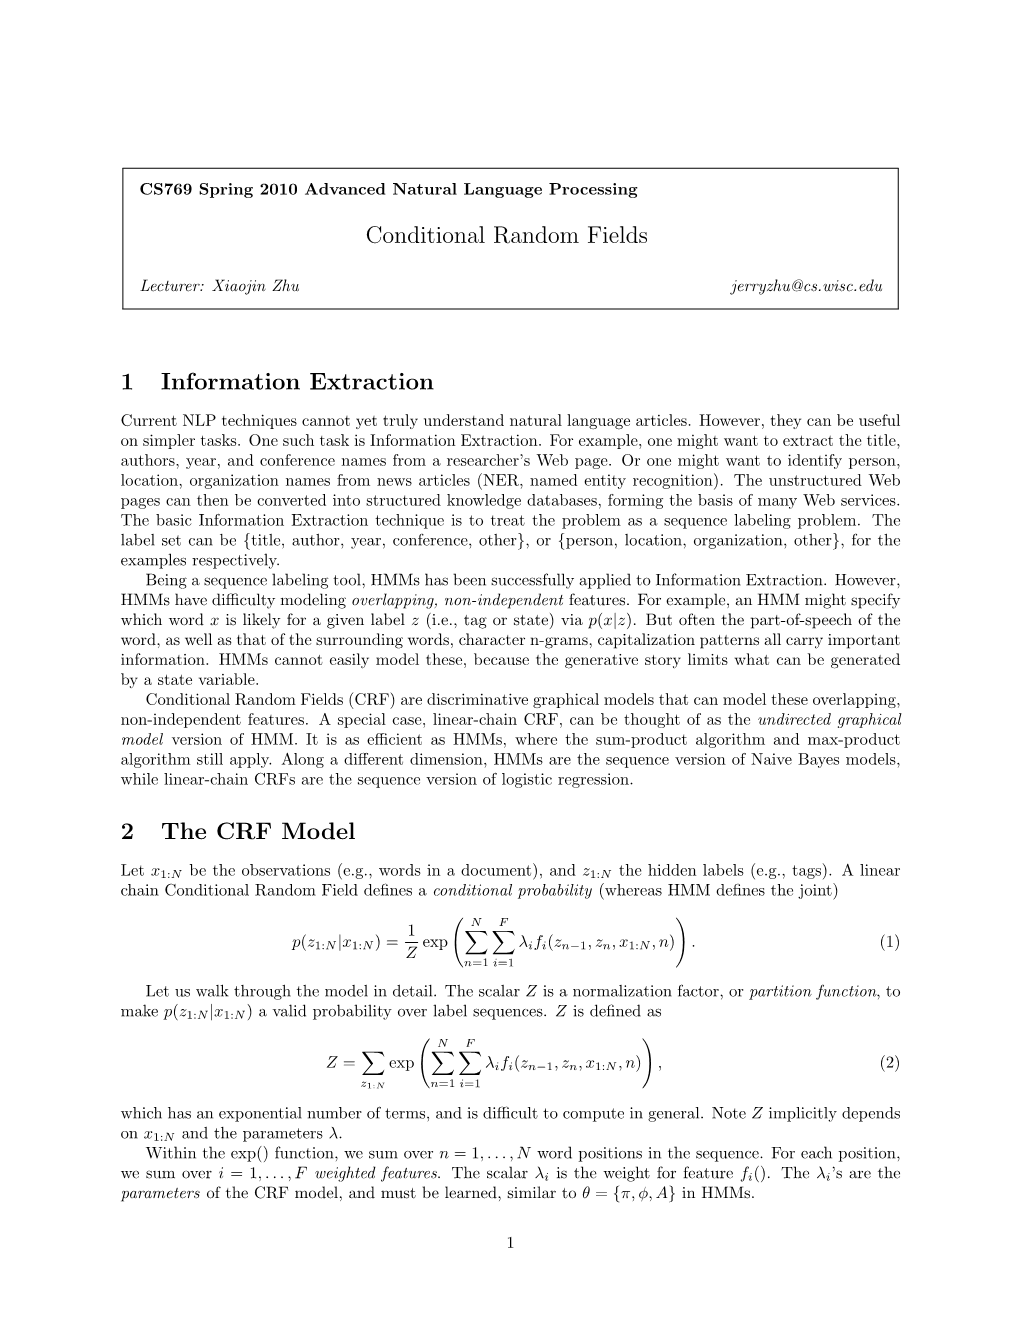 Conditional Random Fields 1 Information Extraction 2 the CRF